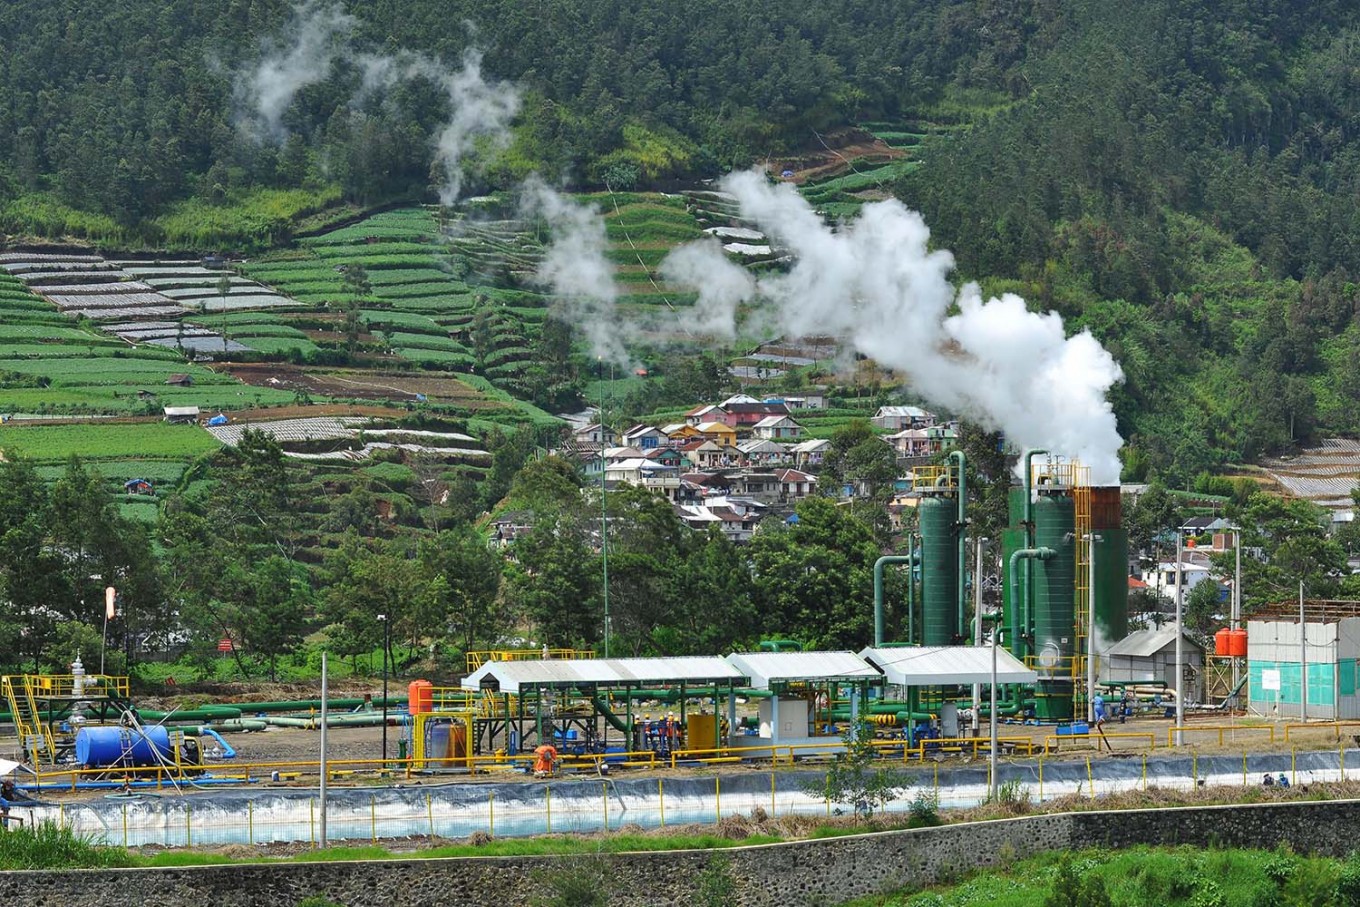 A geothermal heat pump installation owned by state-owned PT Geo Dipa Energi is in operation in Batang, Central Java, in January. (Antara/Anis Efizudin)